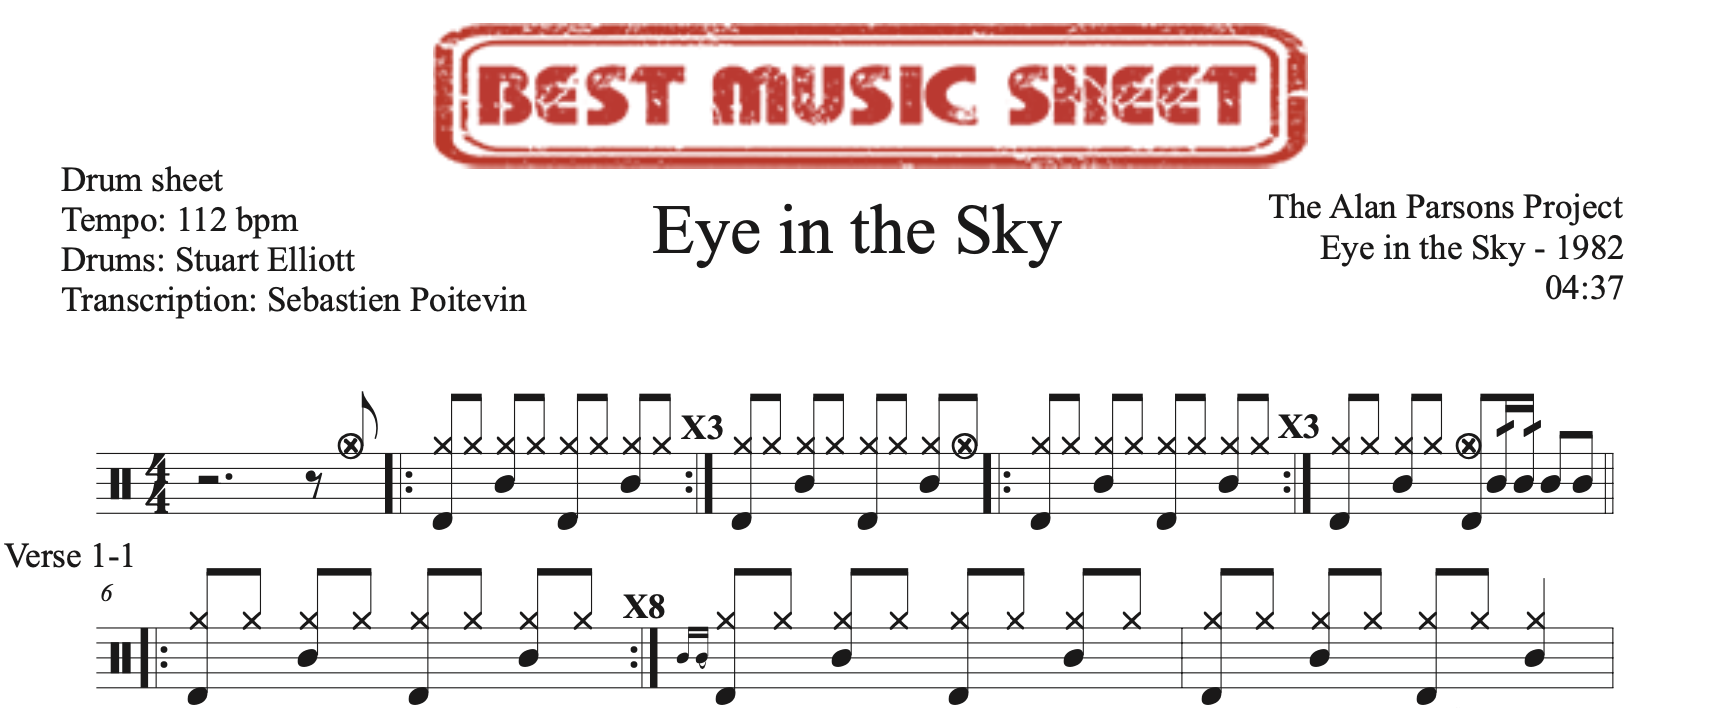 Sample drum sheet of Eye In The Sky by The Alan Parsons Project